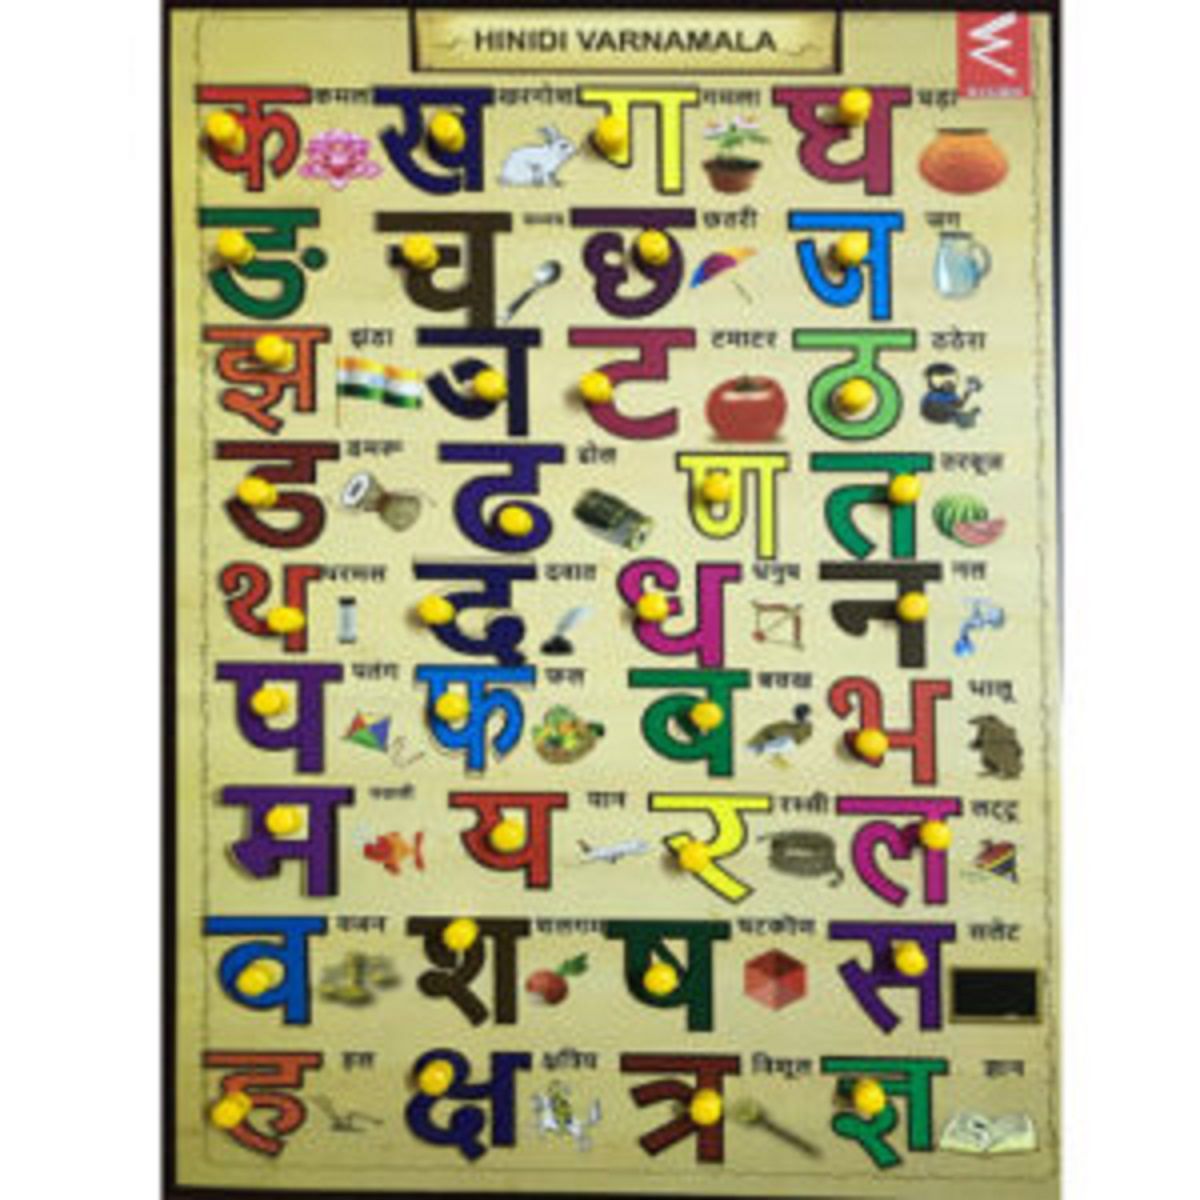     			WISSEN Wooden Hindi Varnmala learning Educational Knob Tray-12*18 inch for kids 2 years & above